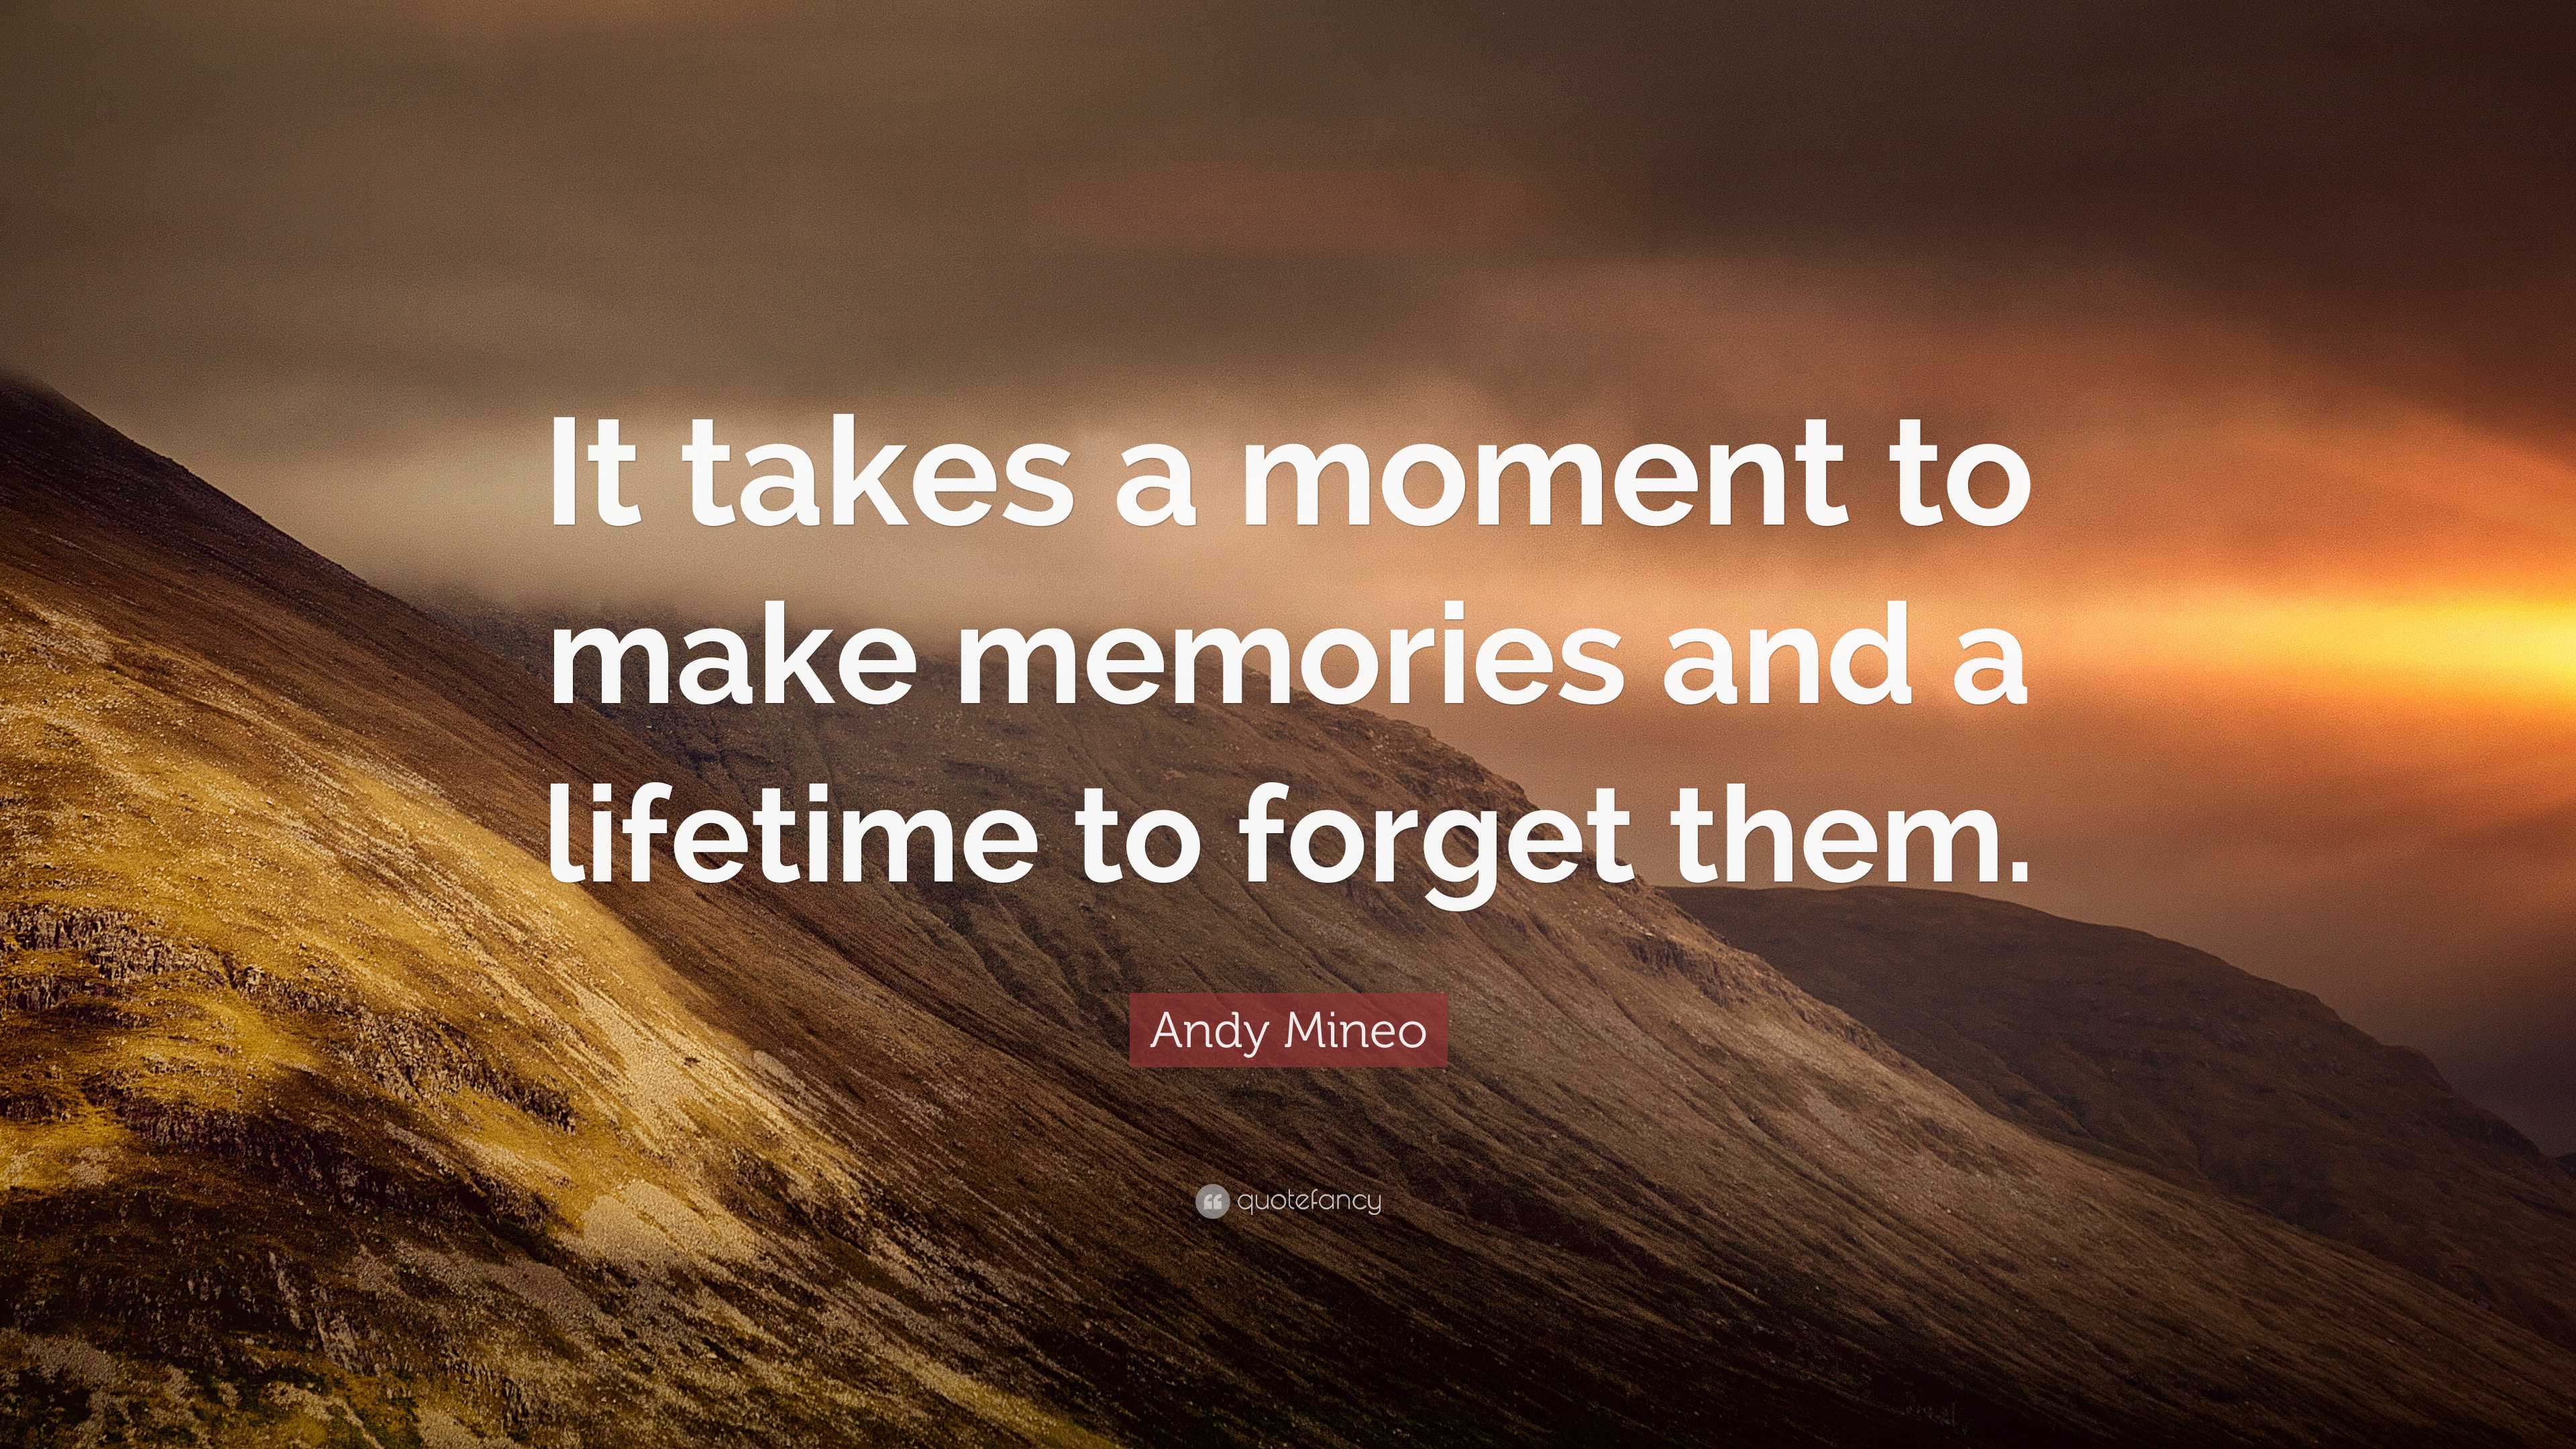 Andy Mineo Quote: “It takes a moment to make memories and a lifetime to ...